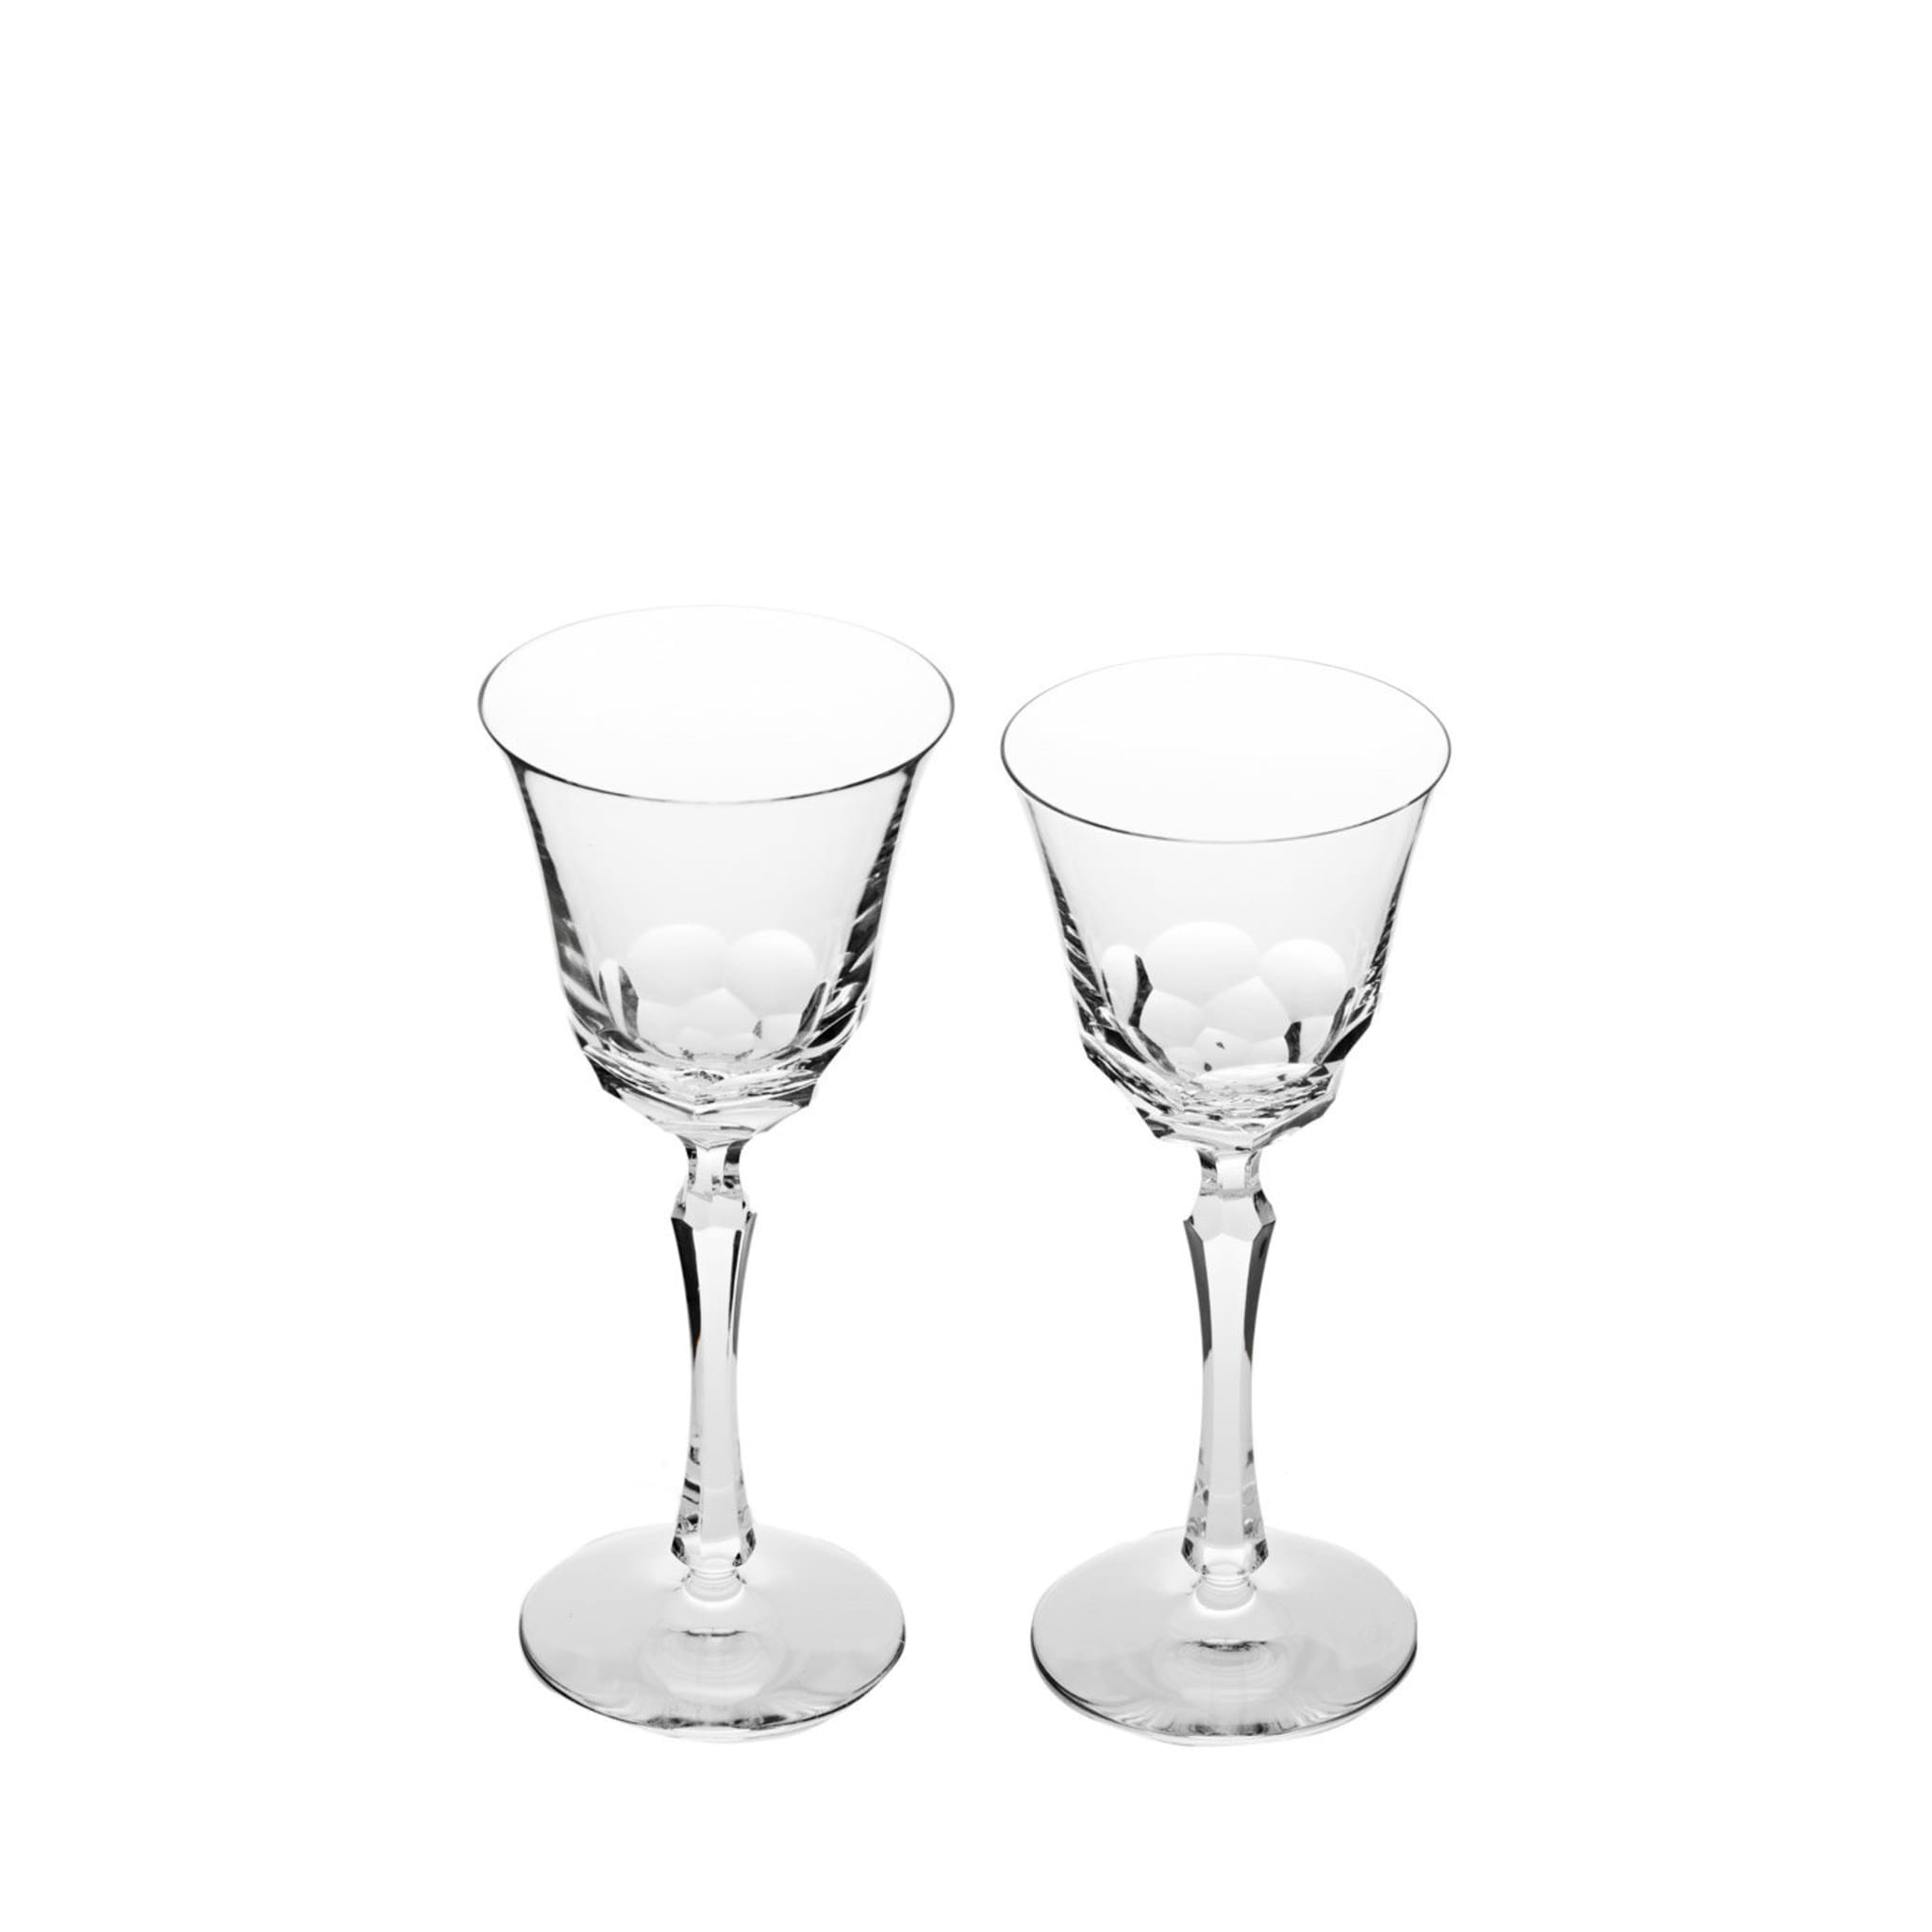 Set of 6 Narciso Crystal Wine Glasses - Alternative view 2